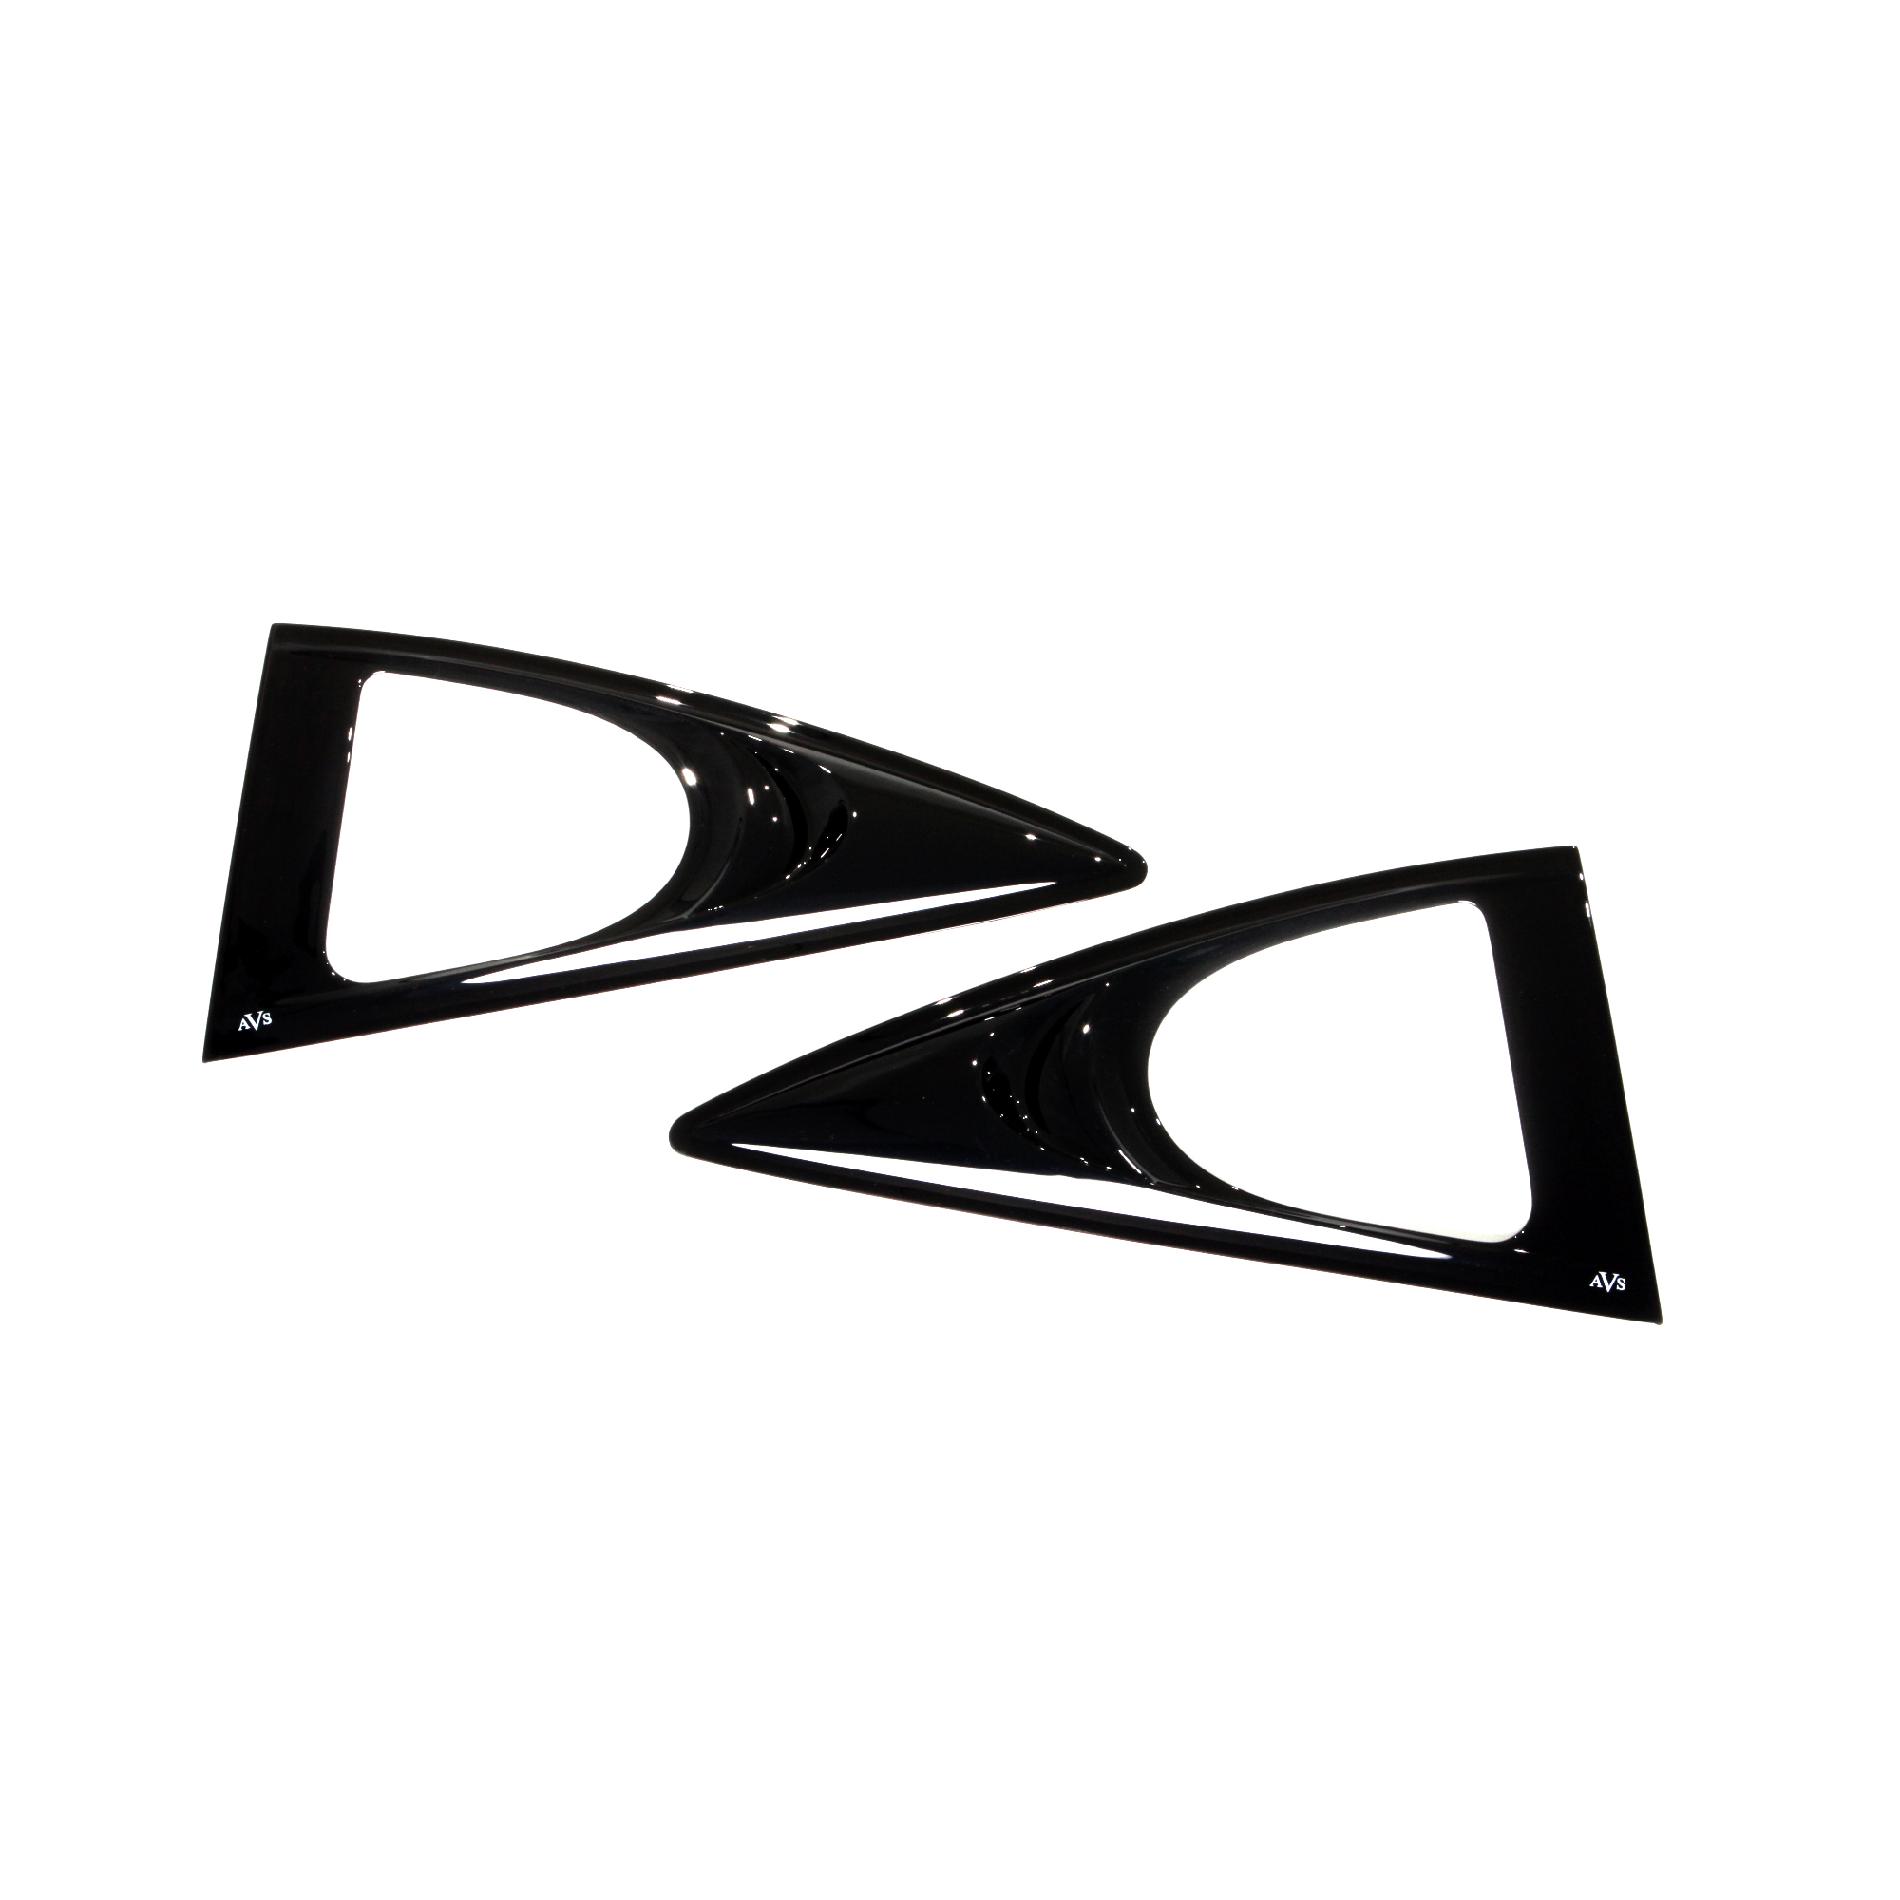 Aeroshade Cut Out Style Window Cover